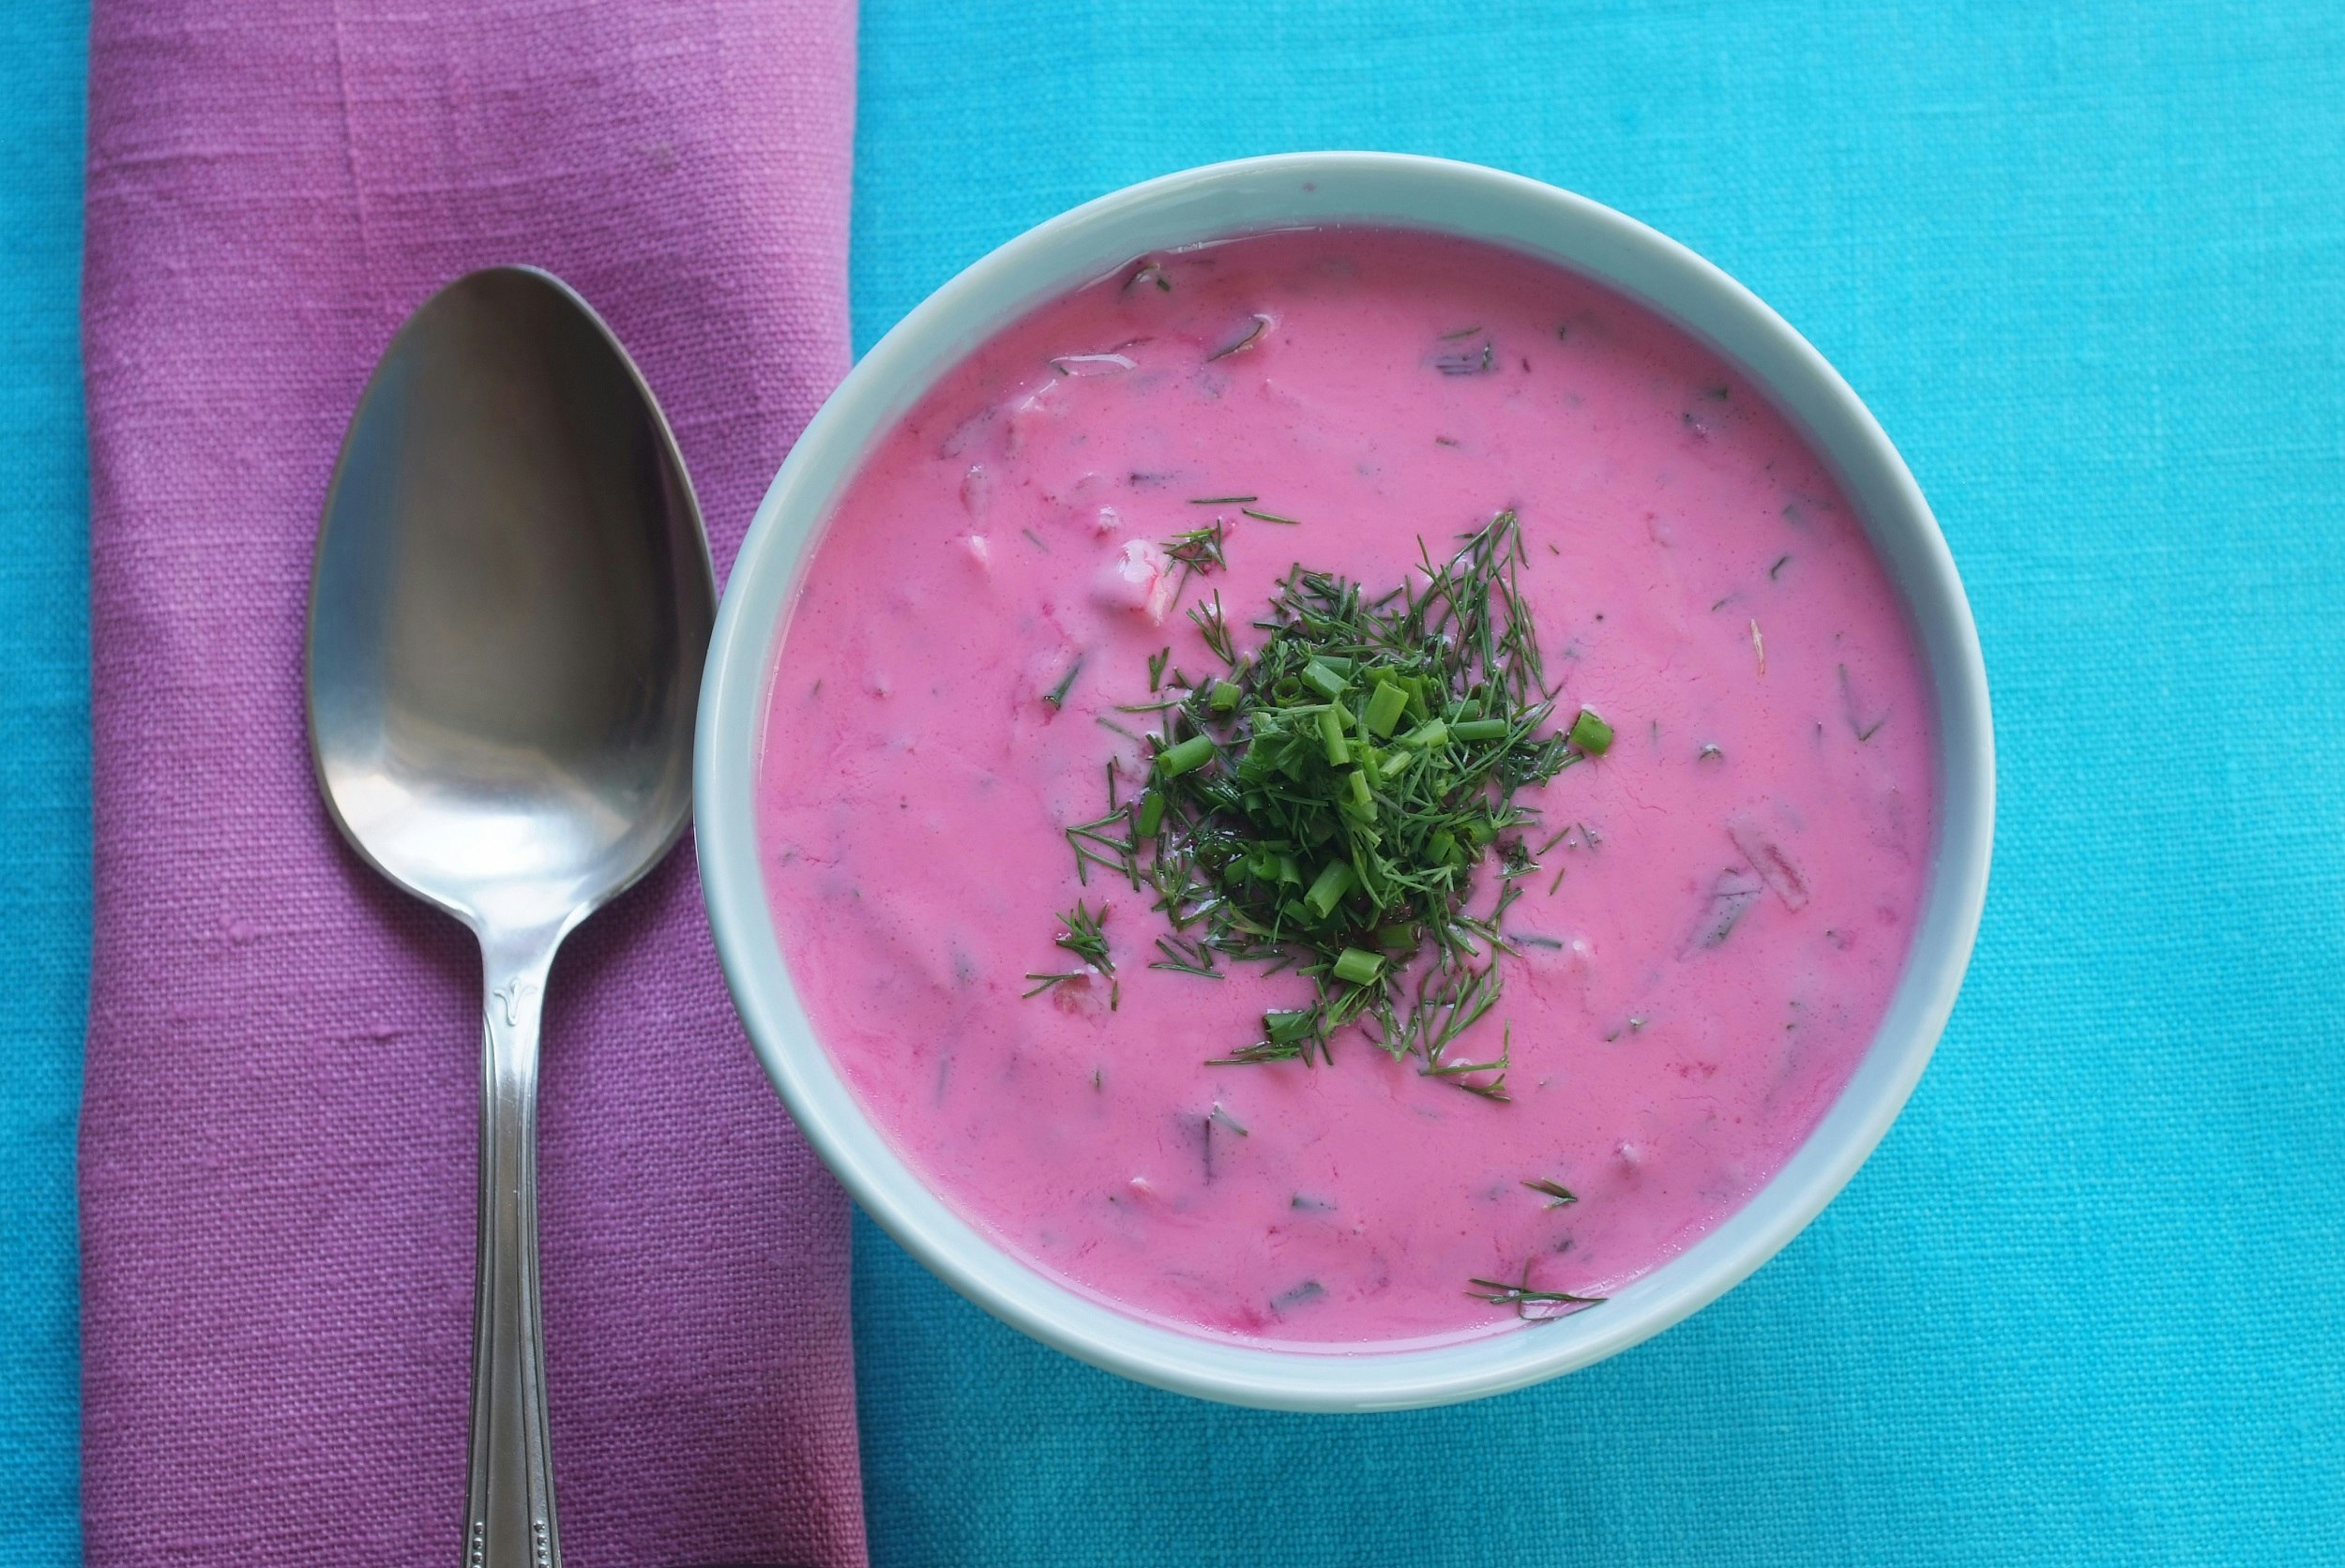 A bowl of bright pink soup, topped with chopped green herbs